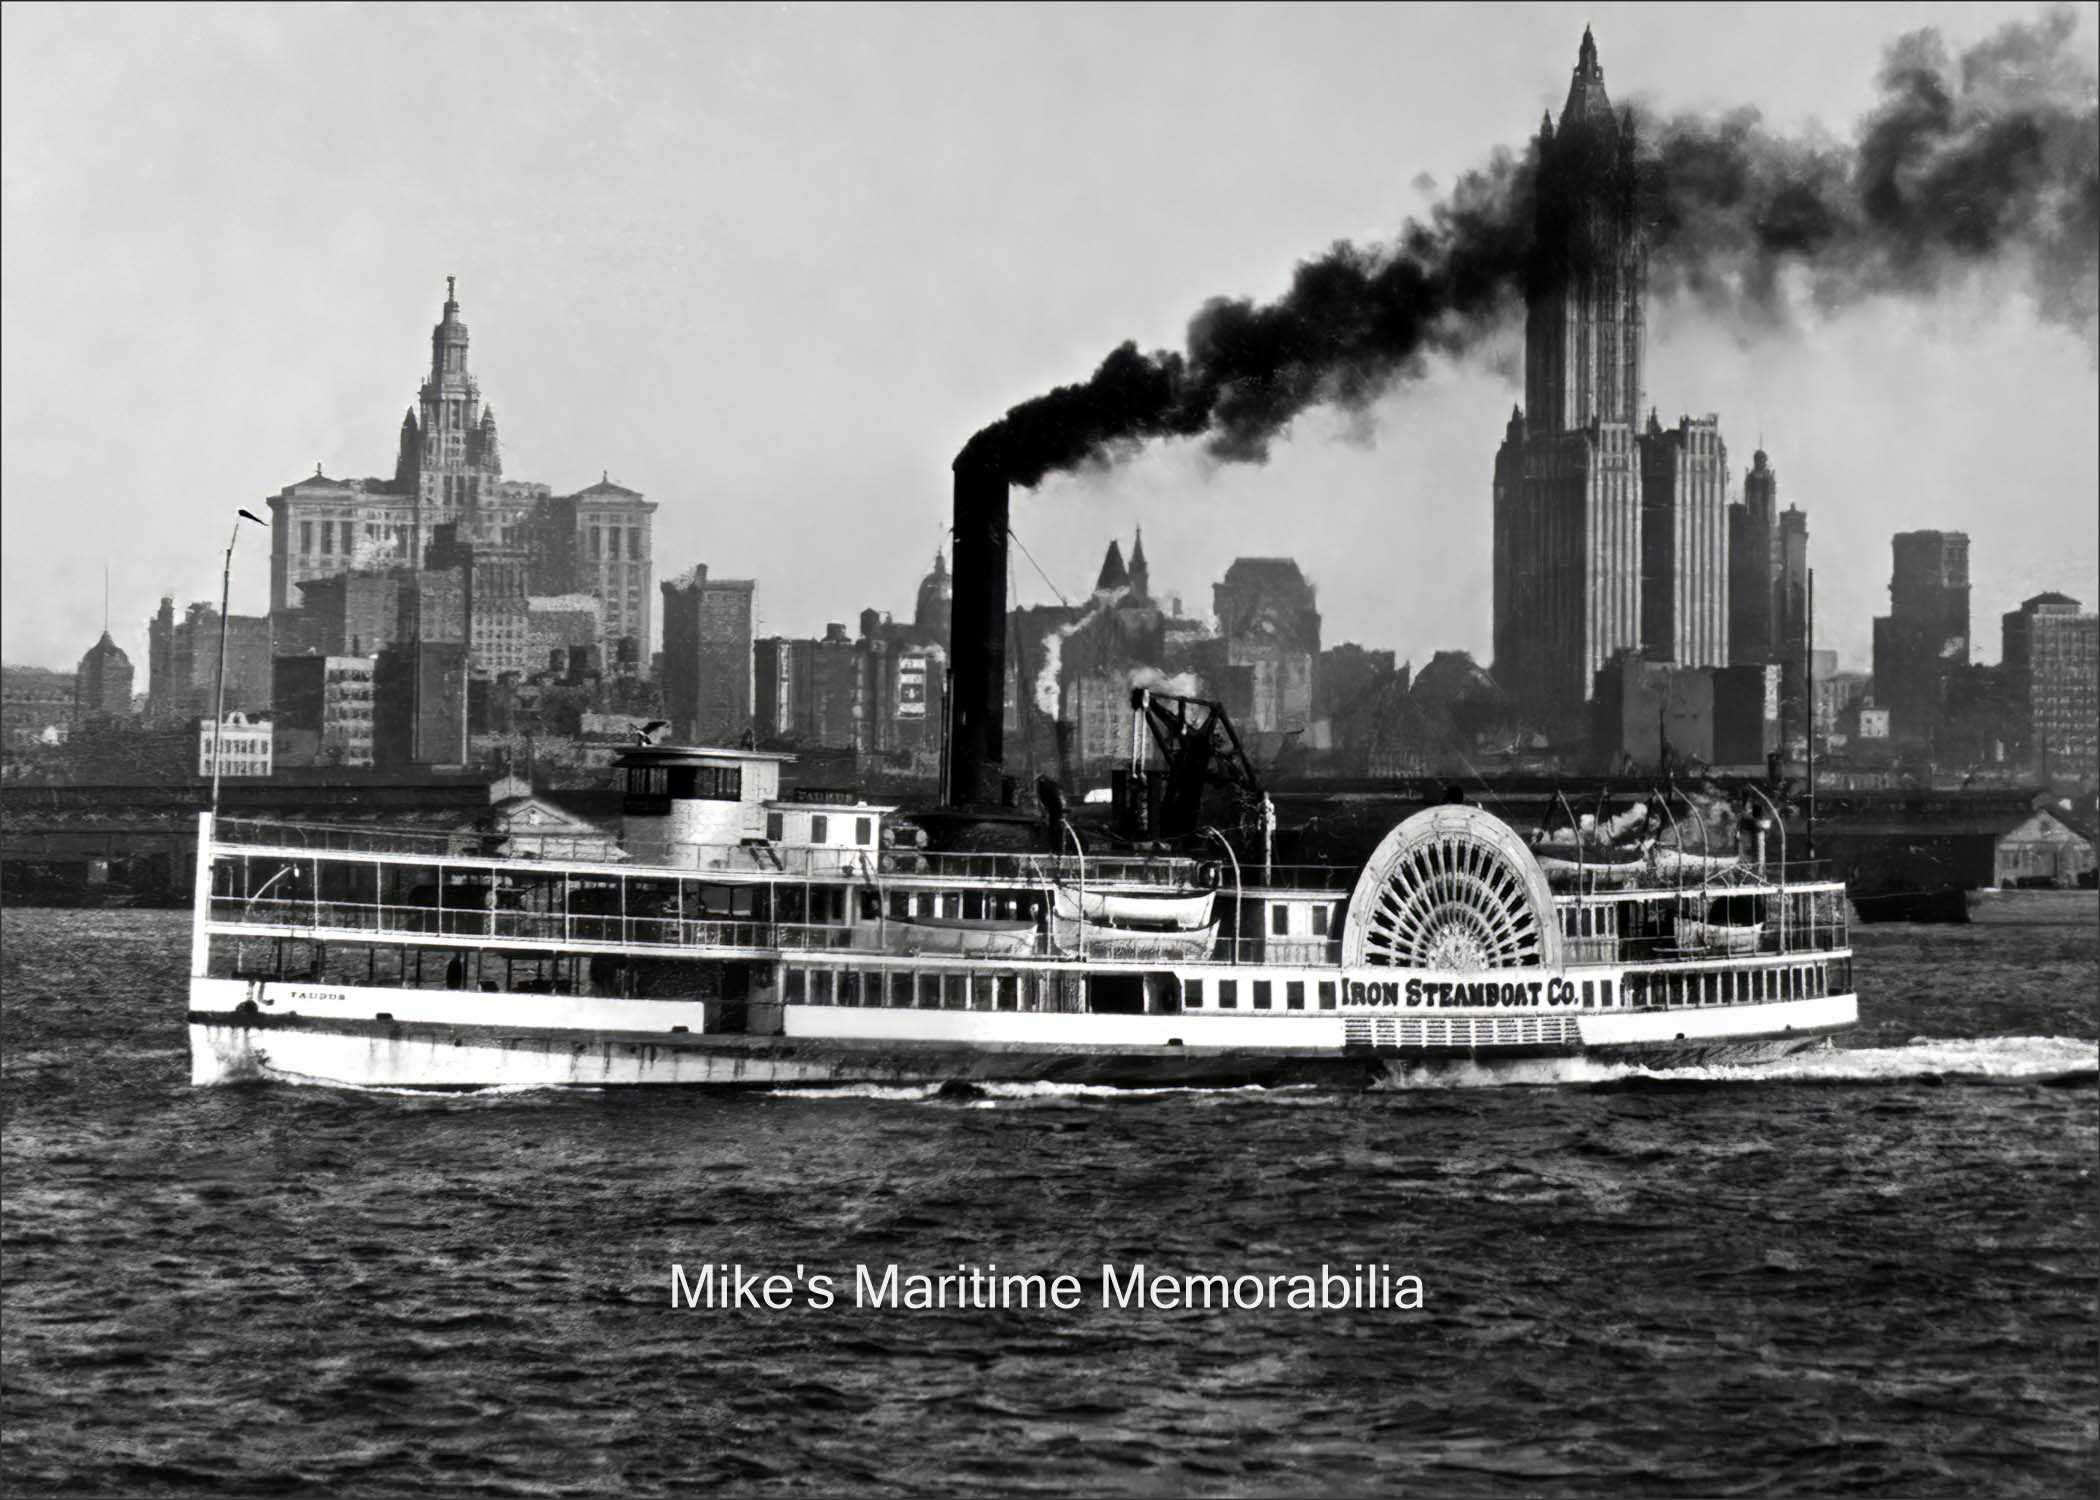 TAURUS, New York, NY – 1905 The "TAURUS" was a triple-decker sidewheeler steamboat built in 1881 at Philadelphia, PA. The "TAURUS" began deep sea fishing in 1904 and sailed from 'The Battery' at the southern tip of Manhattan. Her 234-foot iron hull had a beam of 32 feet and her sidewheels were 31 feet in diameter. At the time, she was one of several vessels in the "Iron Steamboat Co." fleet, but the only boat to offer daily deep sea fishing excursions.